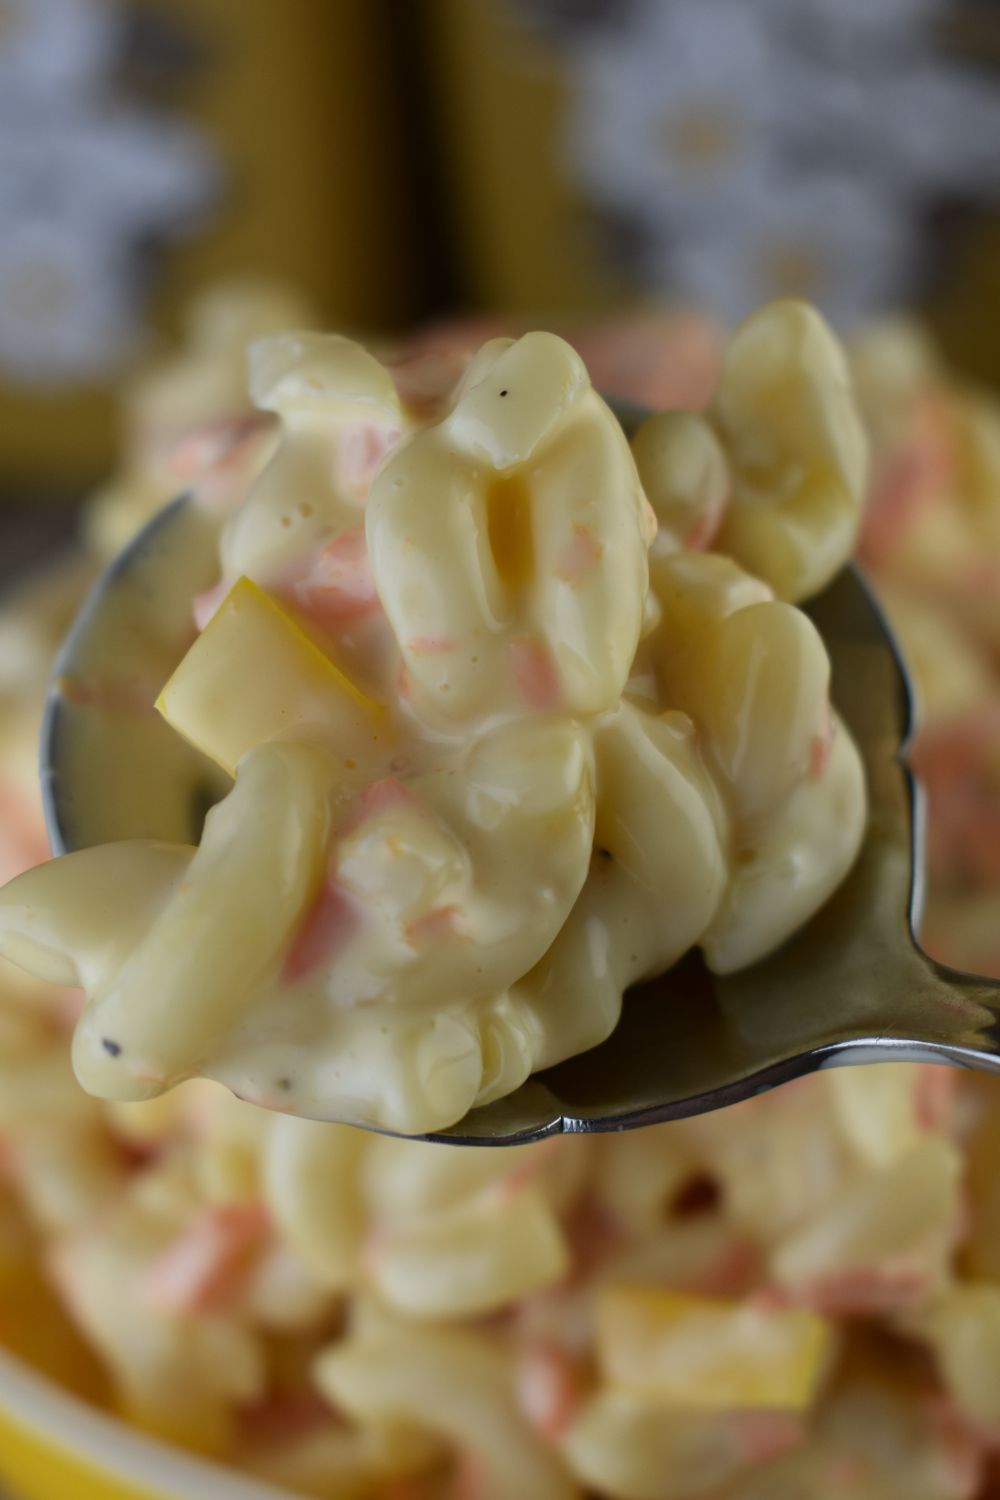 How To Make Old Fashioned Macaroni Salad – A Step By Step Guide